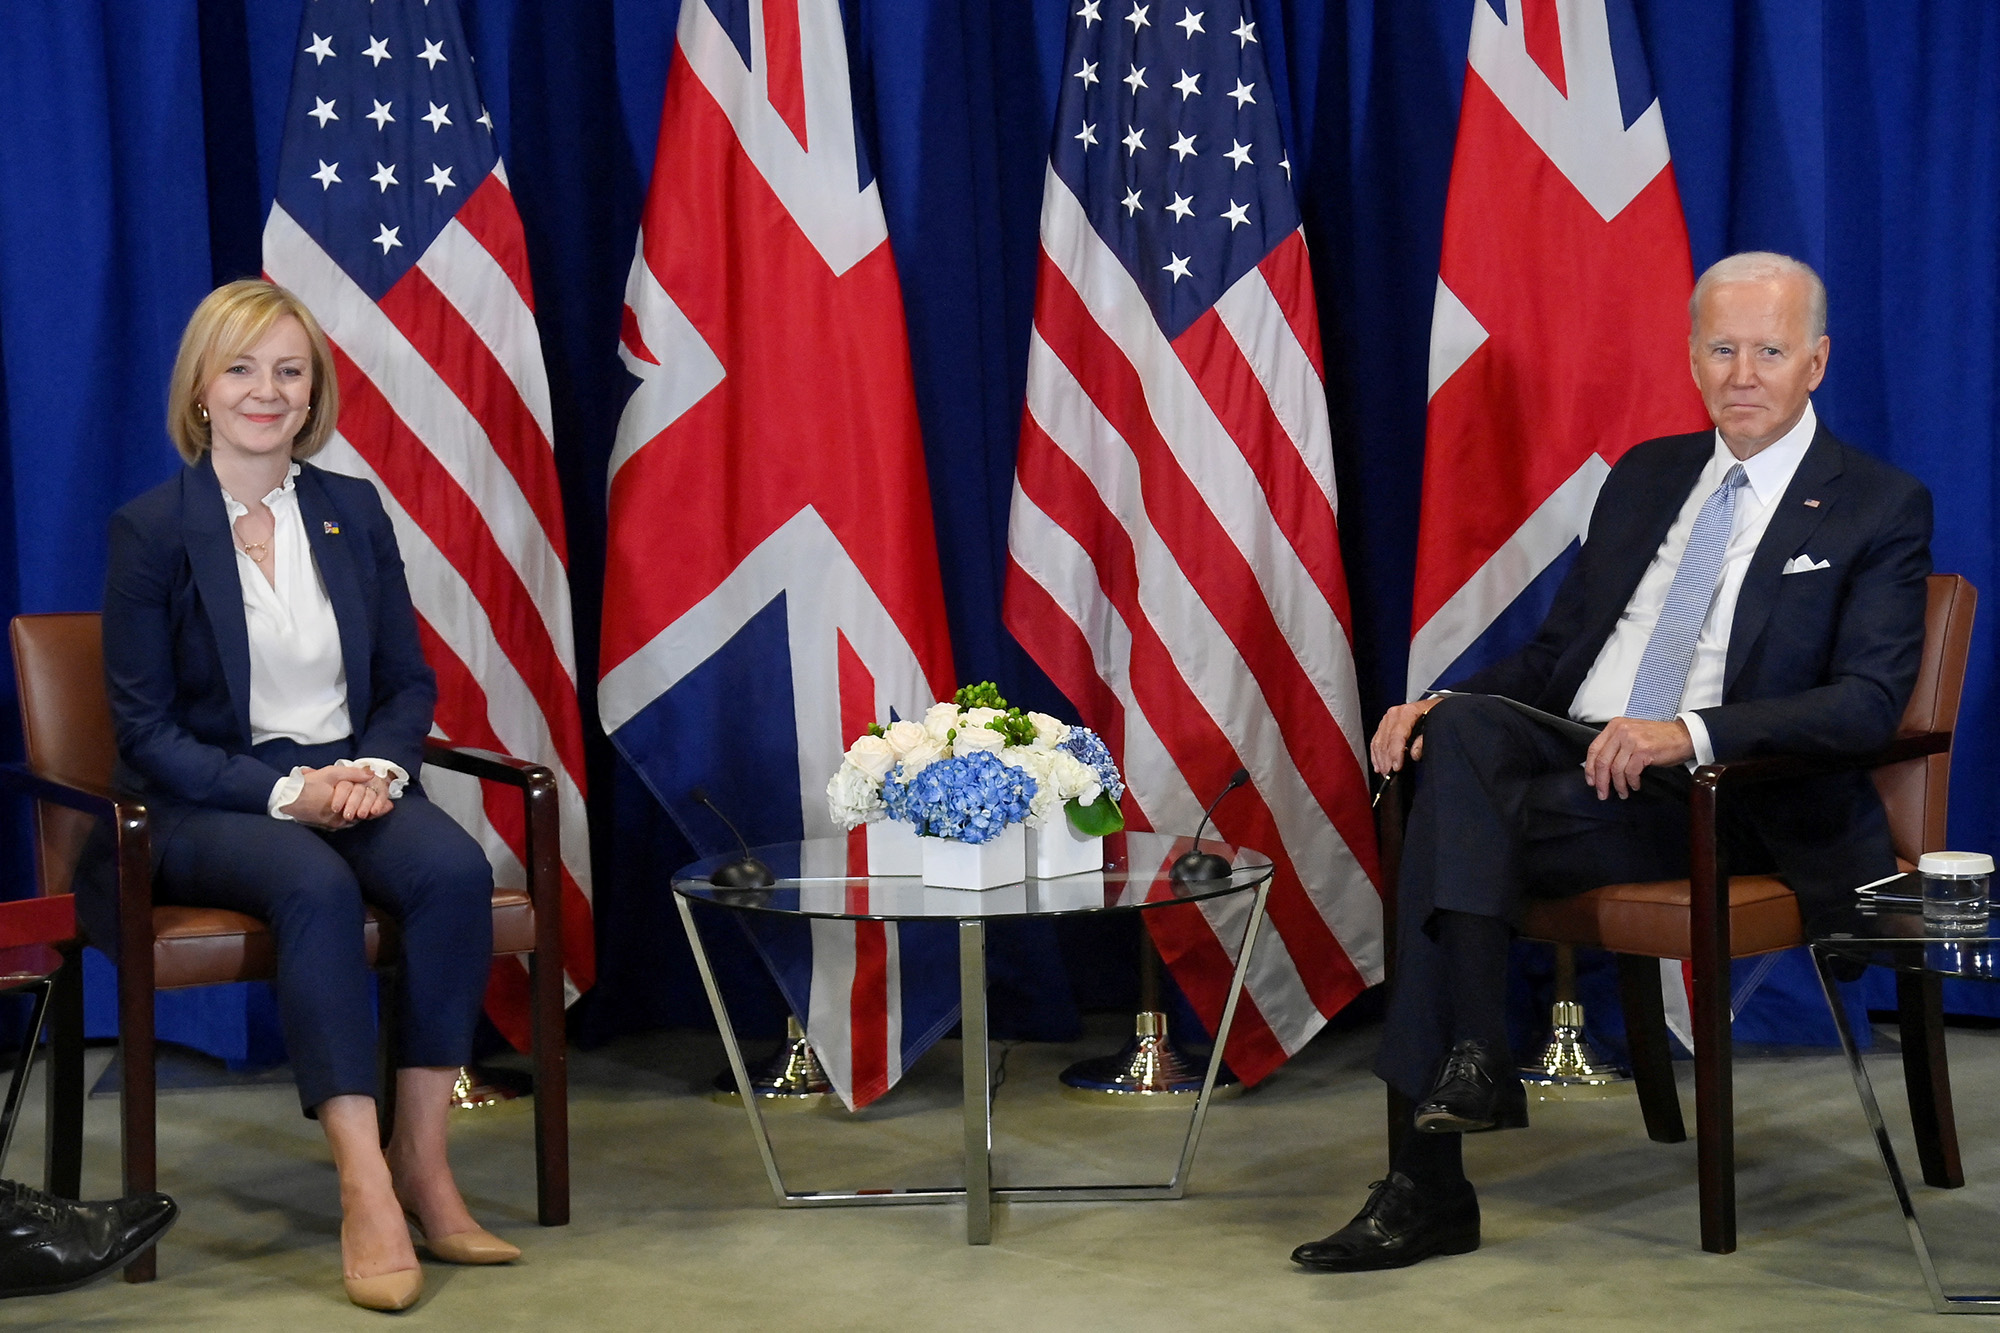 British Prime Minister Liz Truss meets with U.S. President Joe Biden during a bilateral meeting at the United Nations General Assembly Hall on September 21, in New York City.